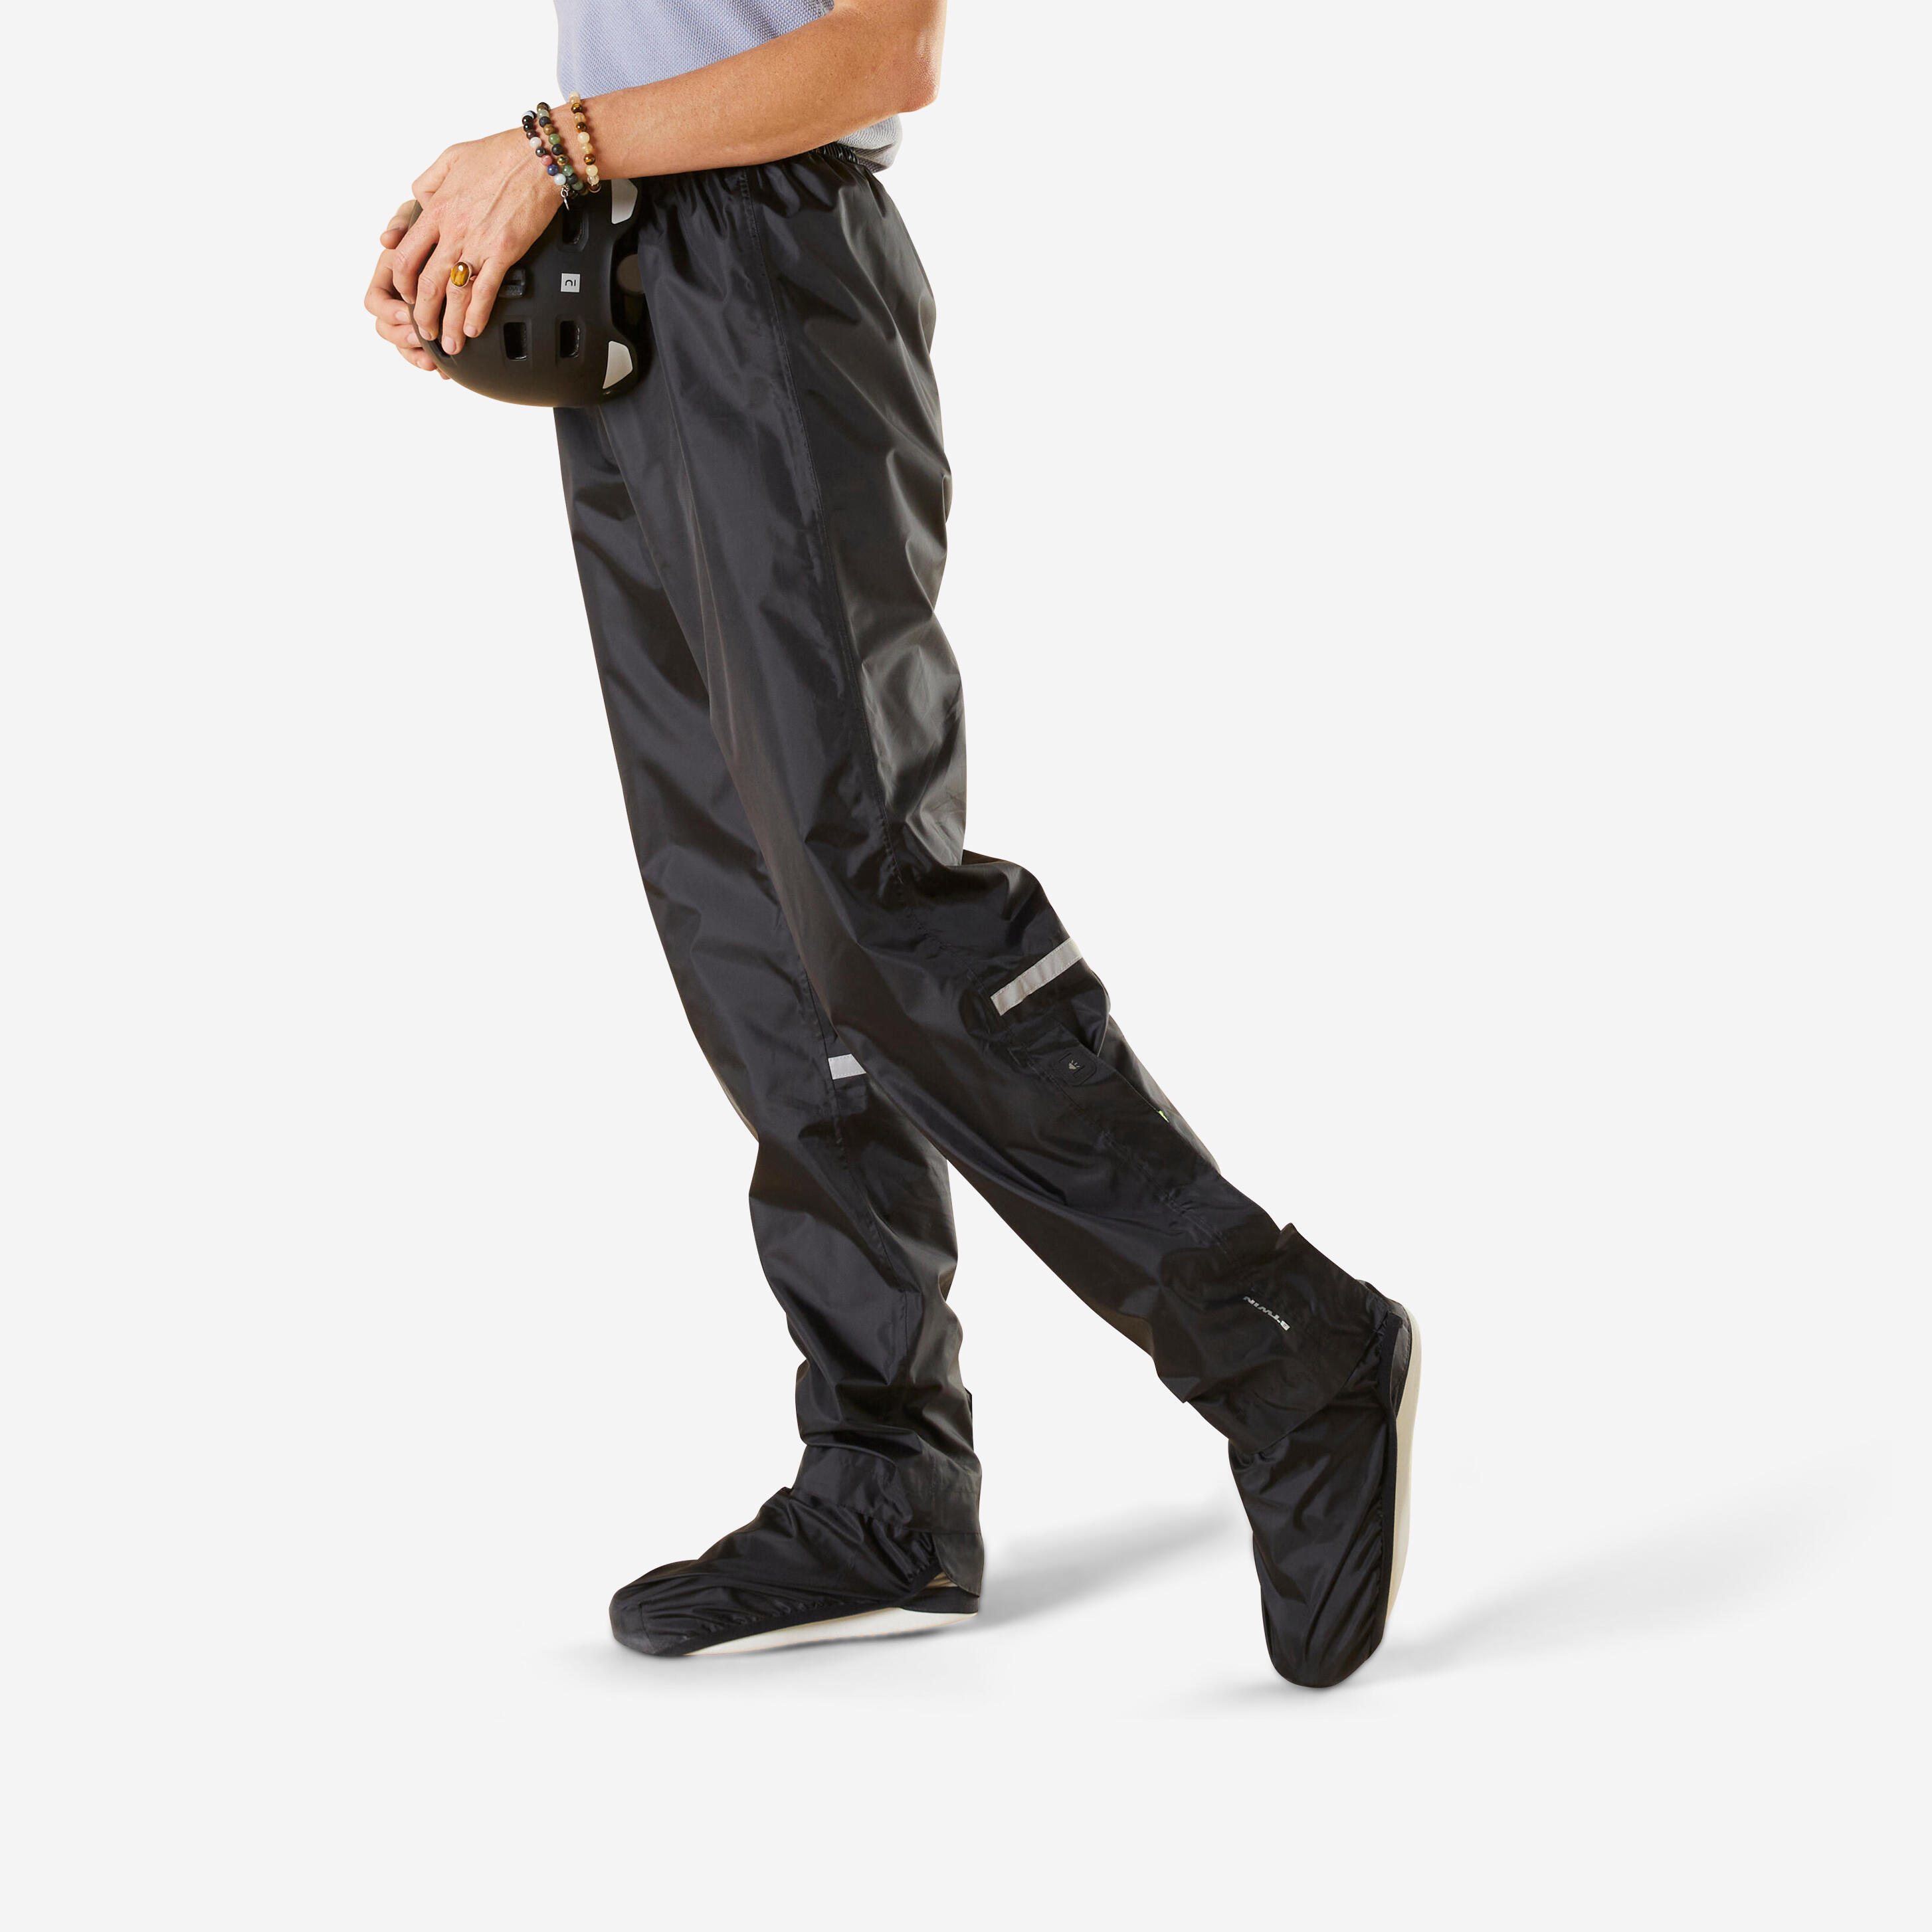 City Cycling Rain Overtrousers with Built-In Overshoes 100 - Black 1/15